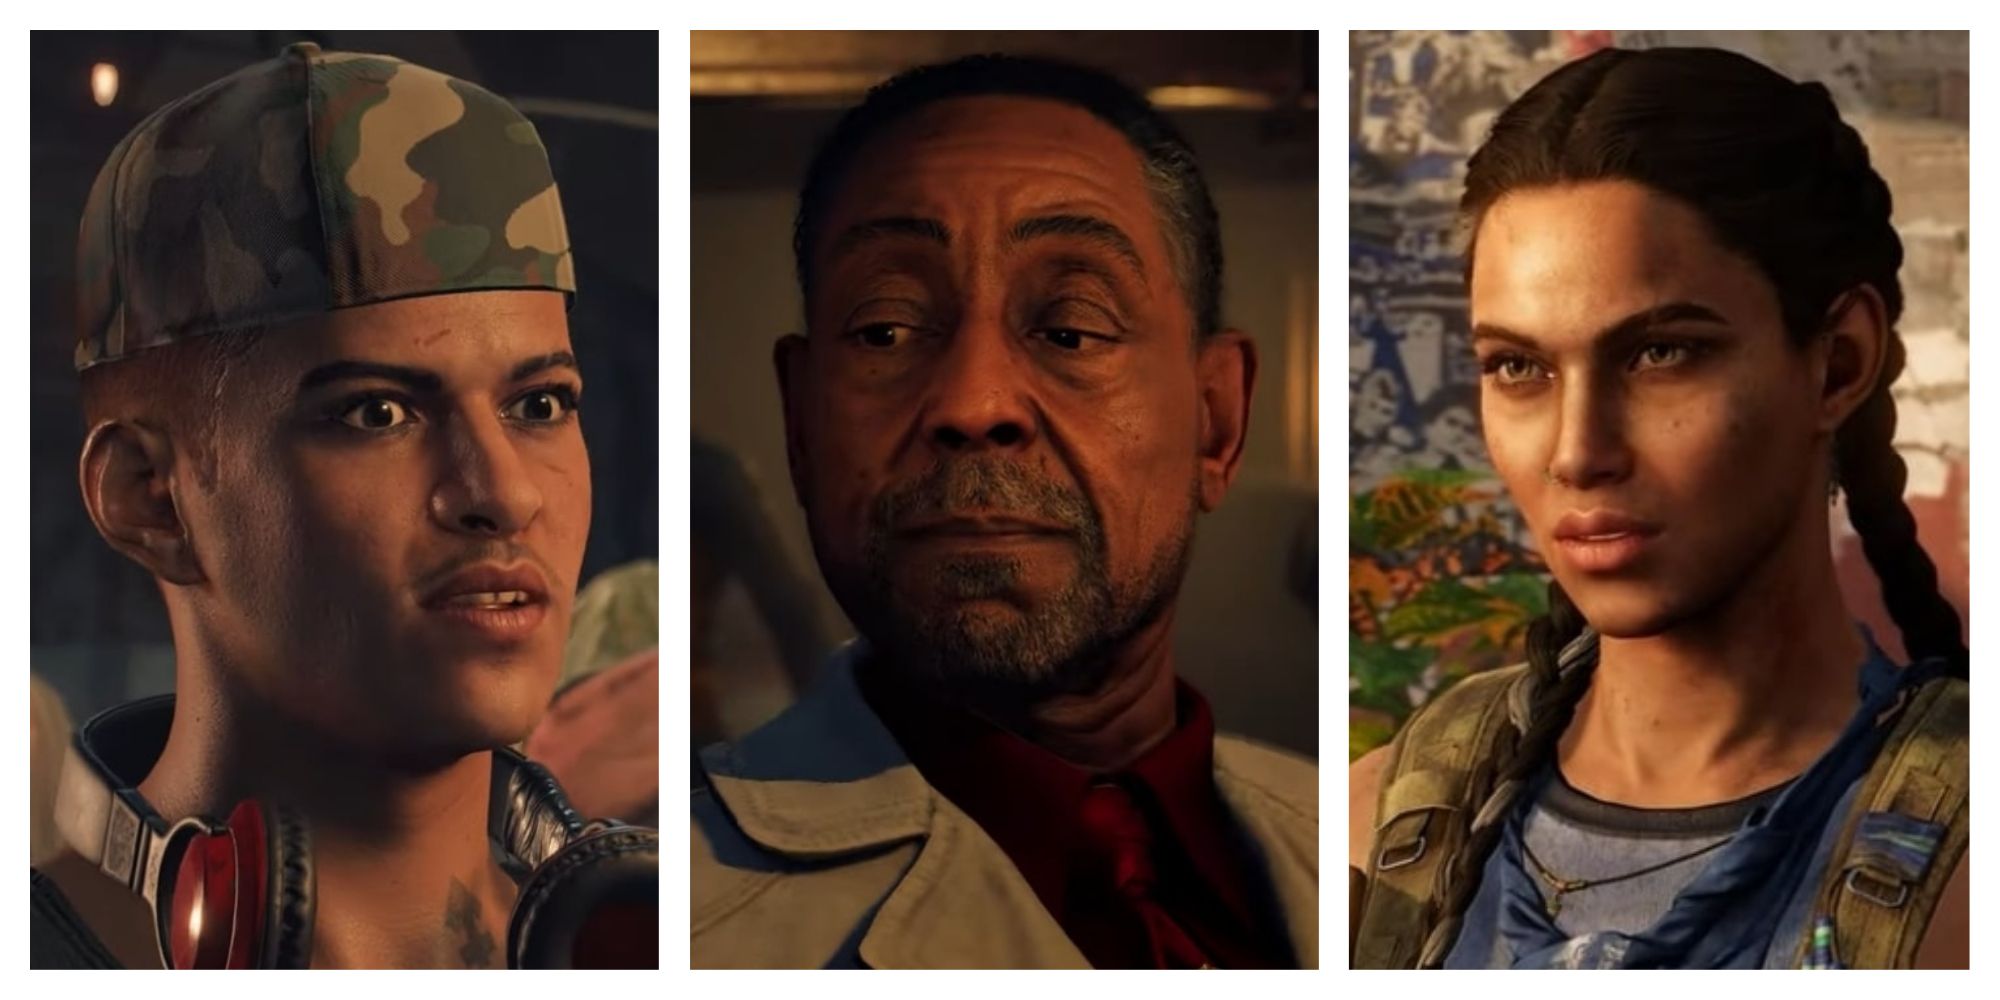 Paolo, Anton, and Clara in Far Cry 6